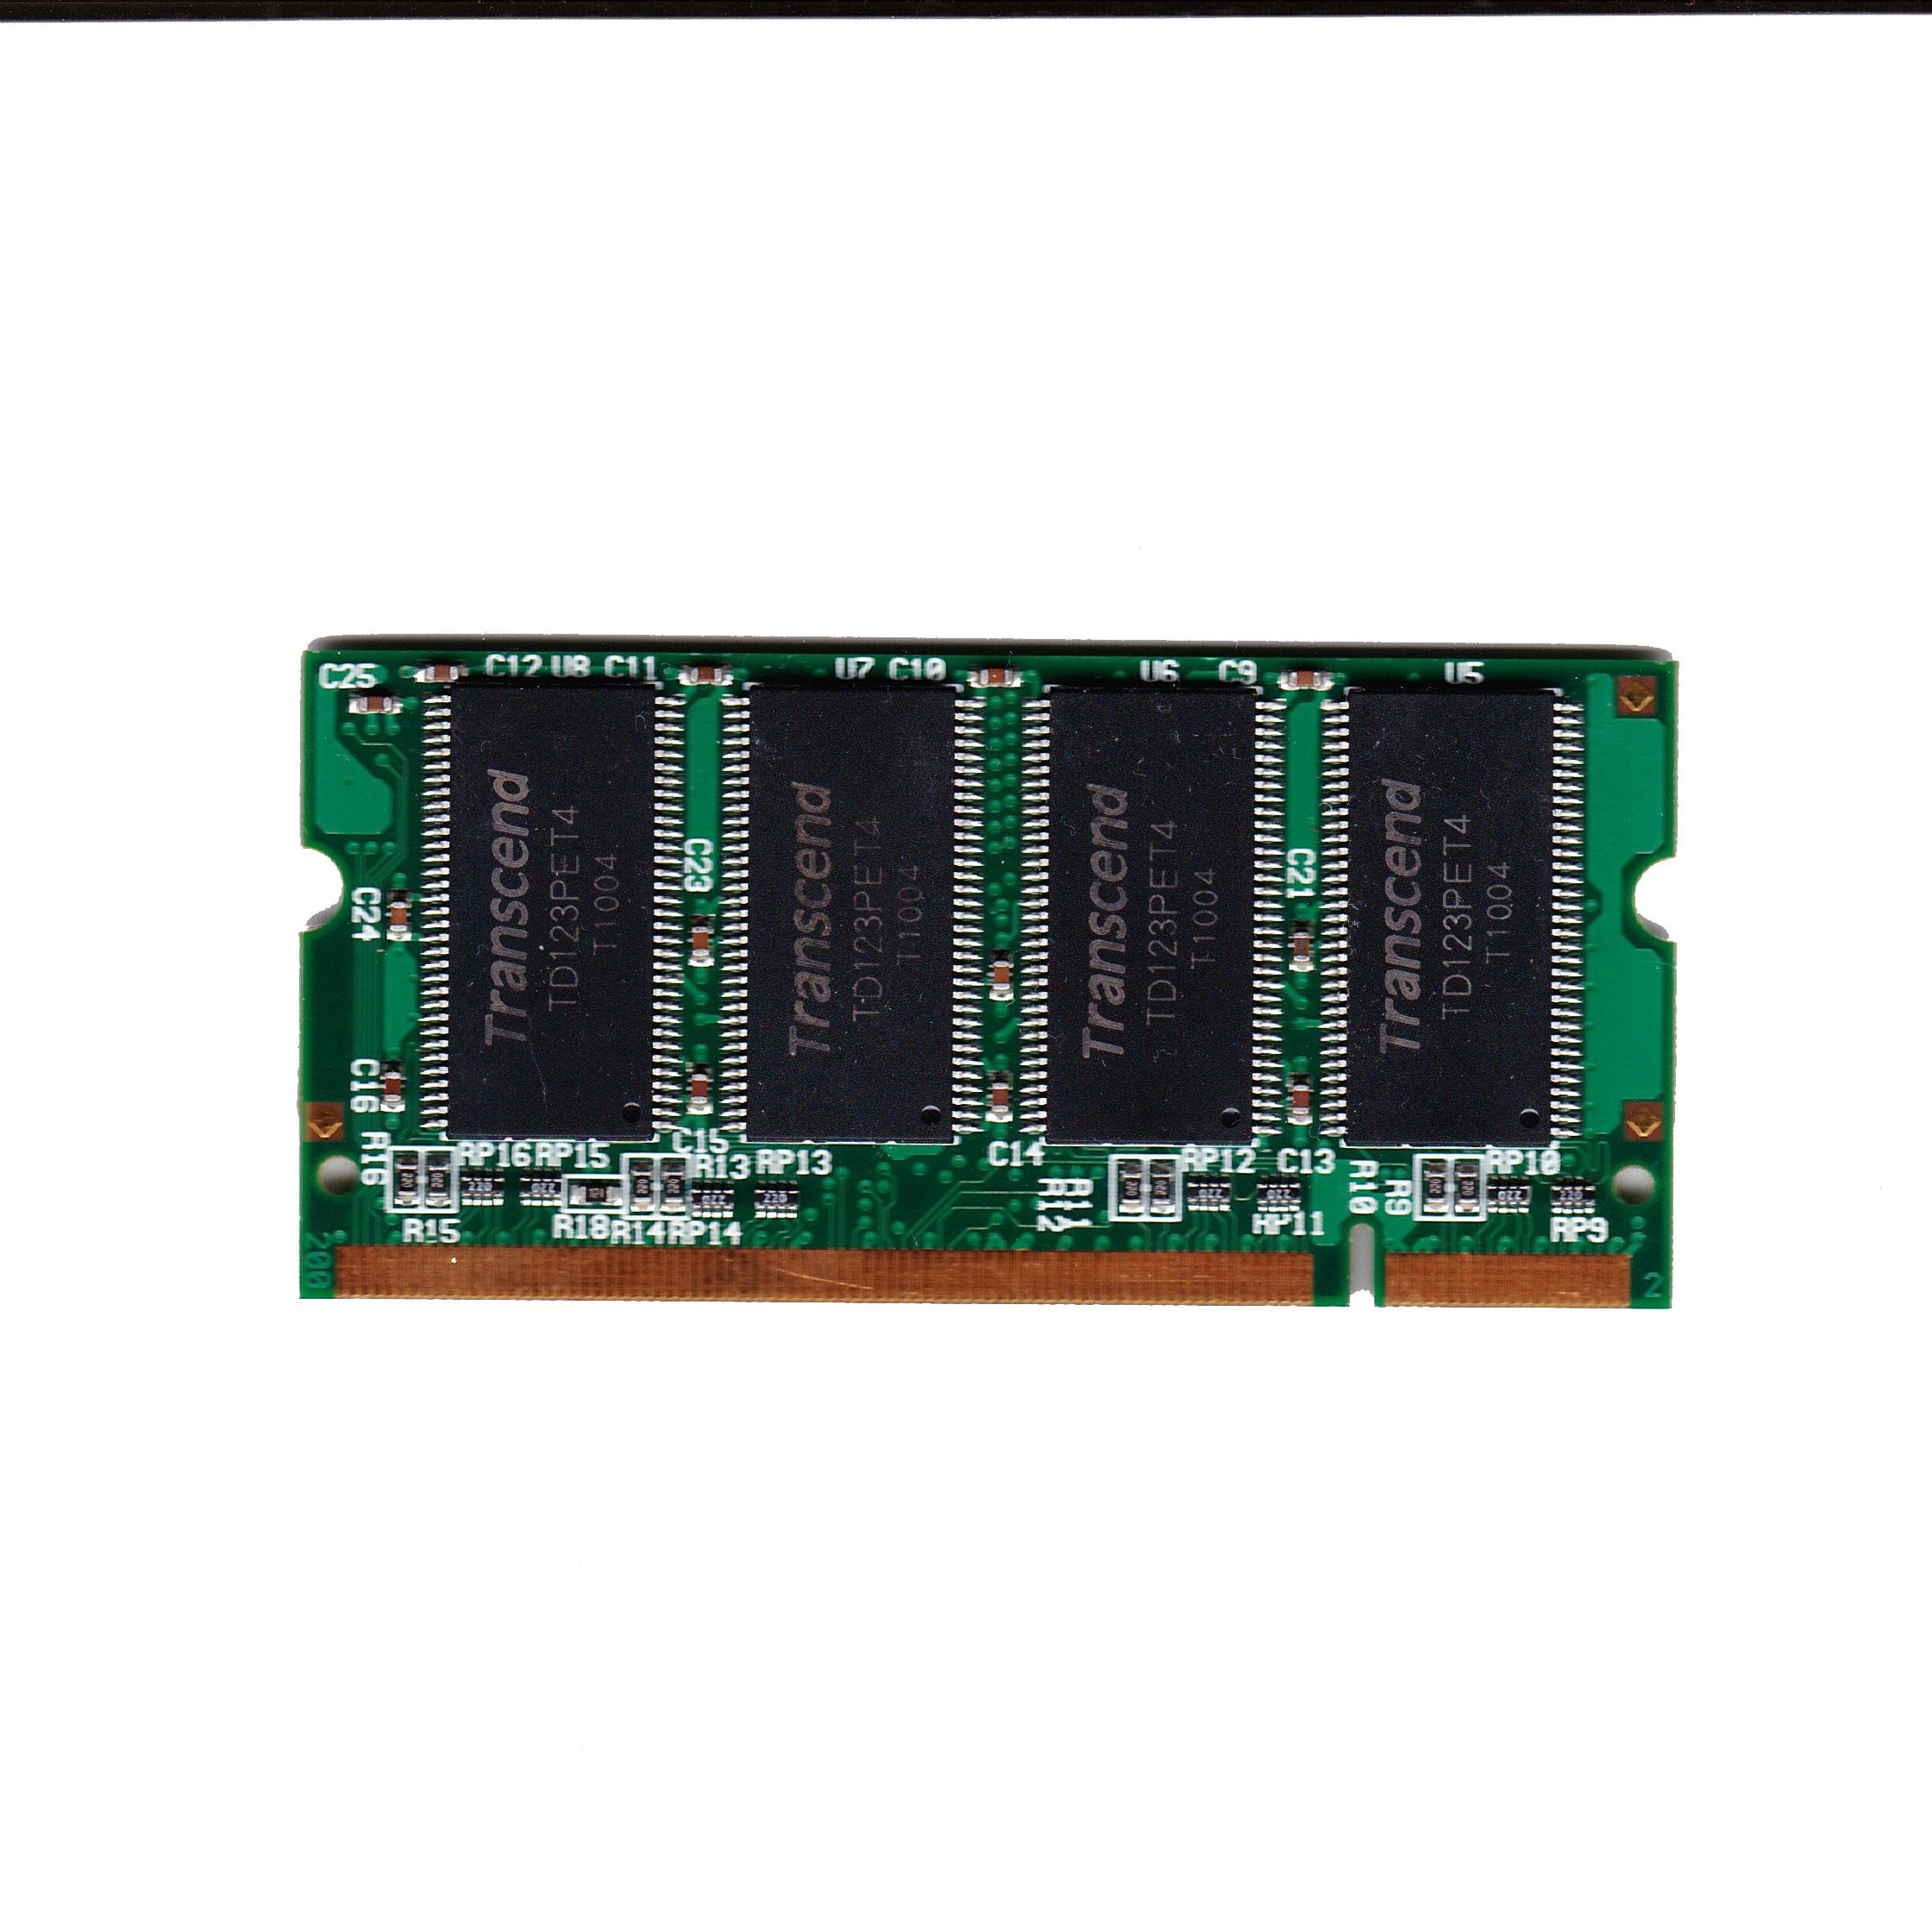 Untested Transcend 512MB DDR 333 SODIM CL2.5 56983-0634 RoHS Preowned 